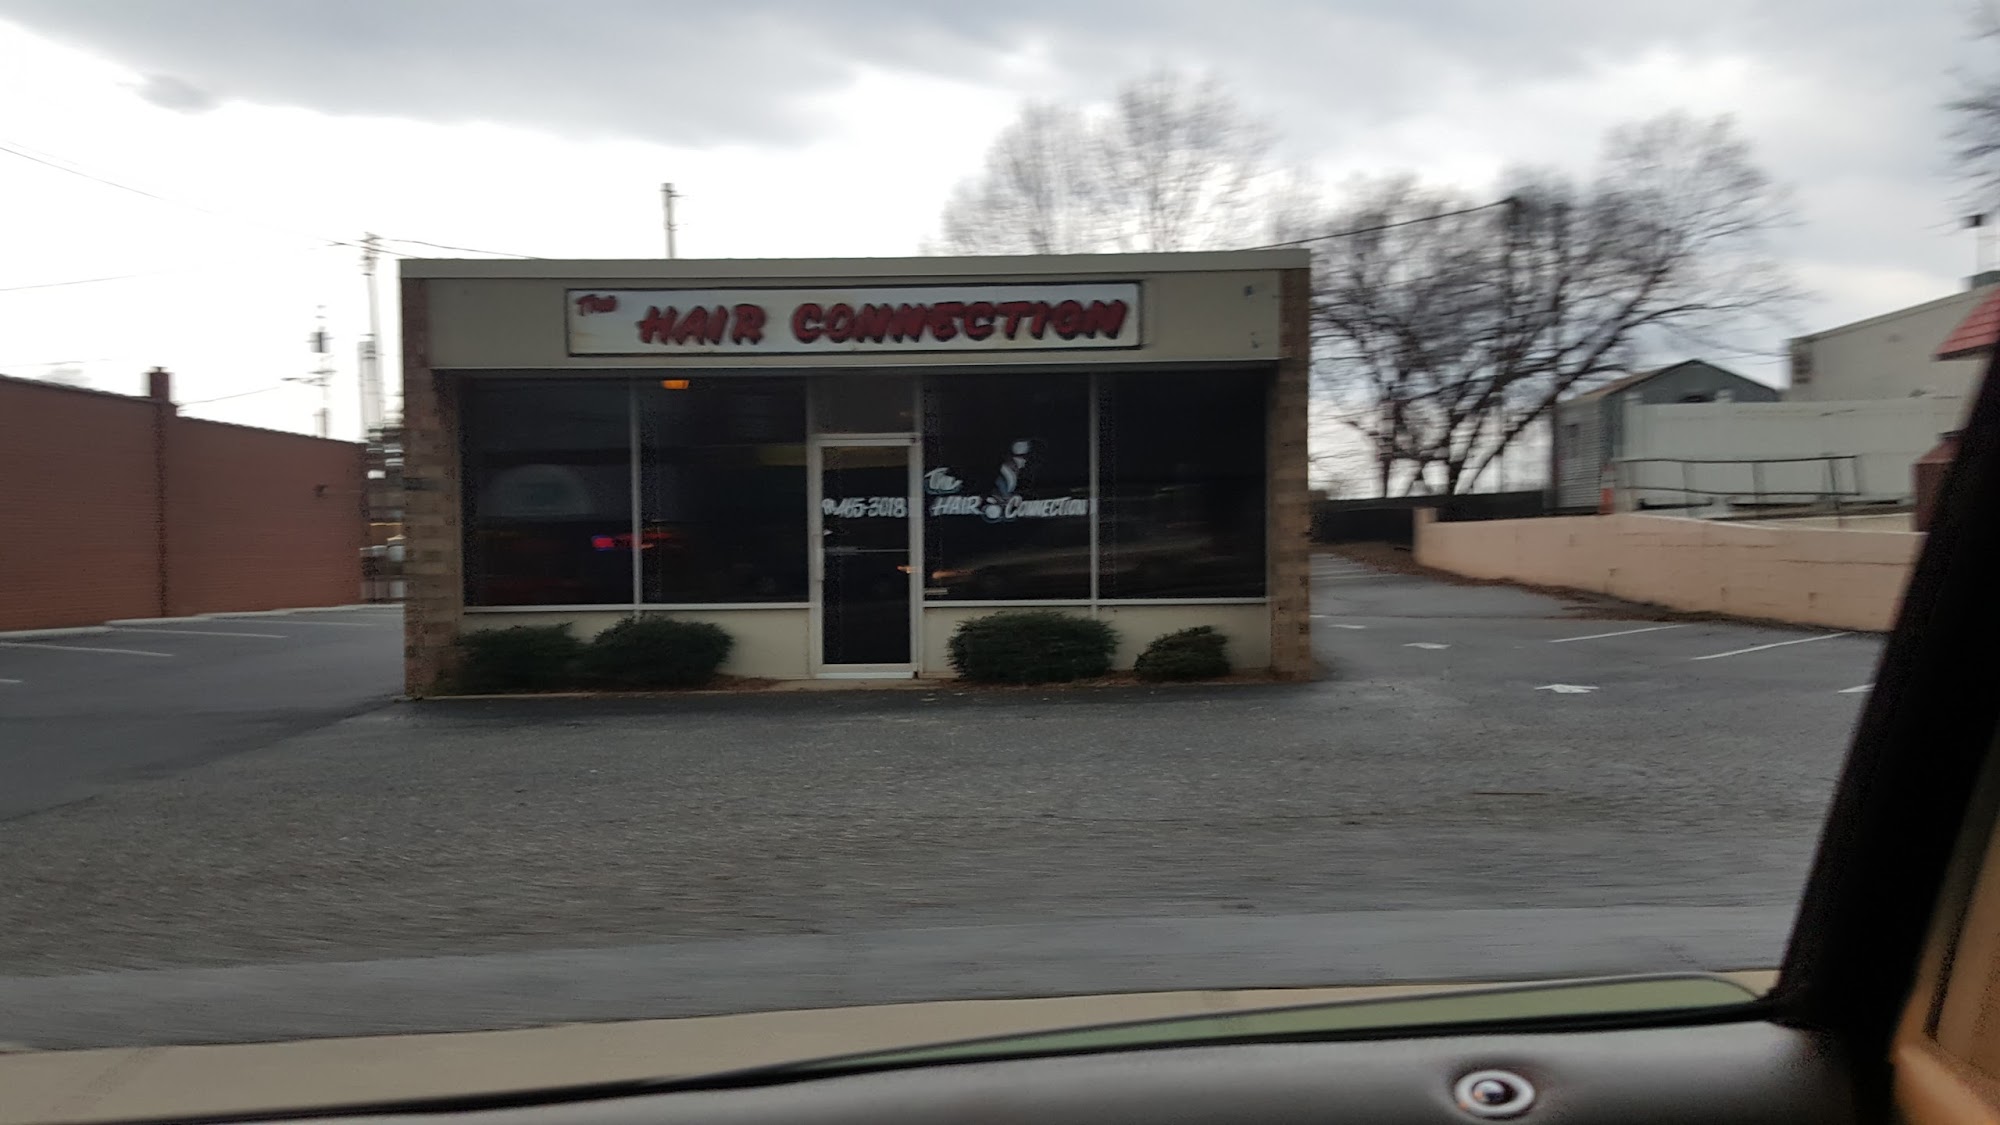 The Hair Connection 117 1st St W, Conover North Carolina 28613